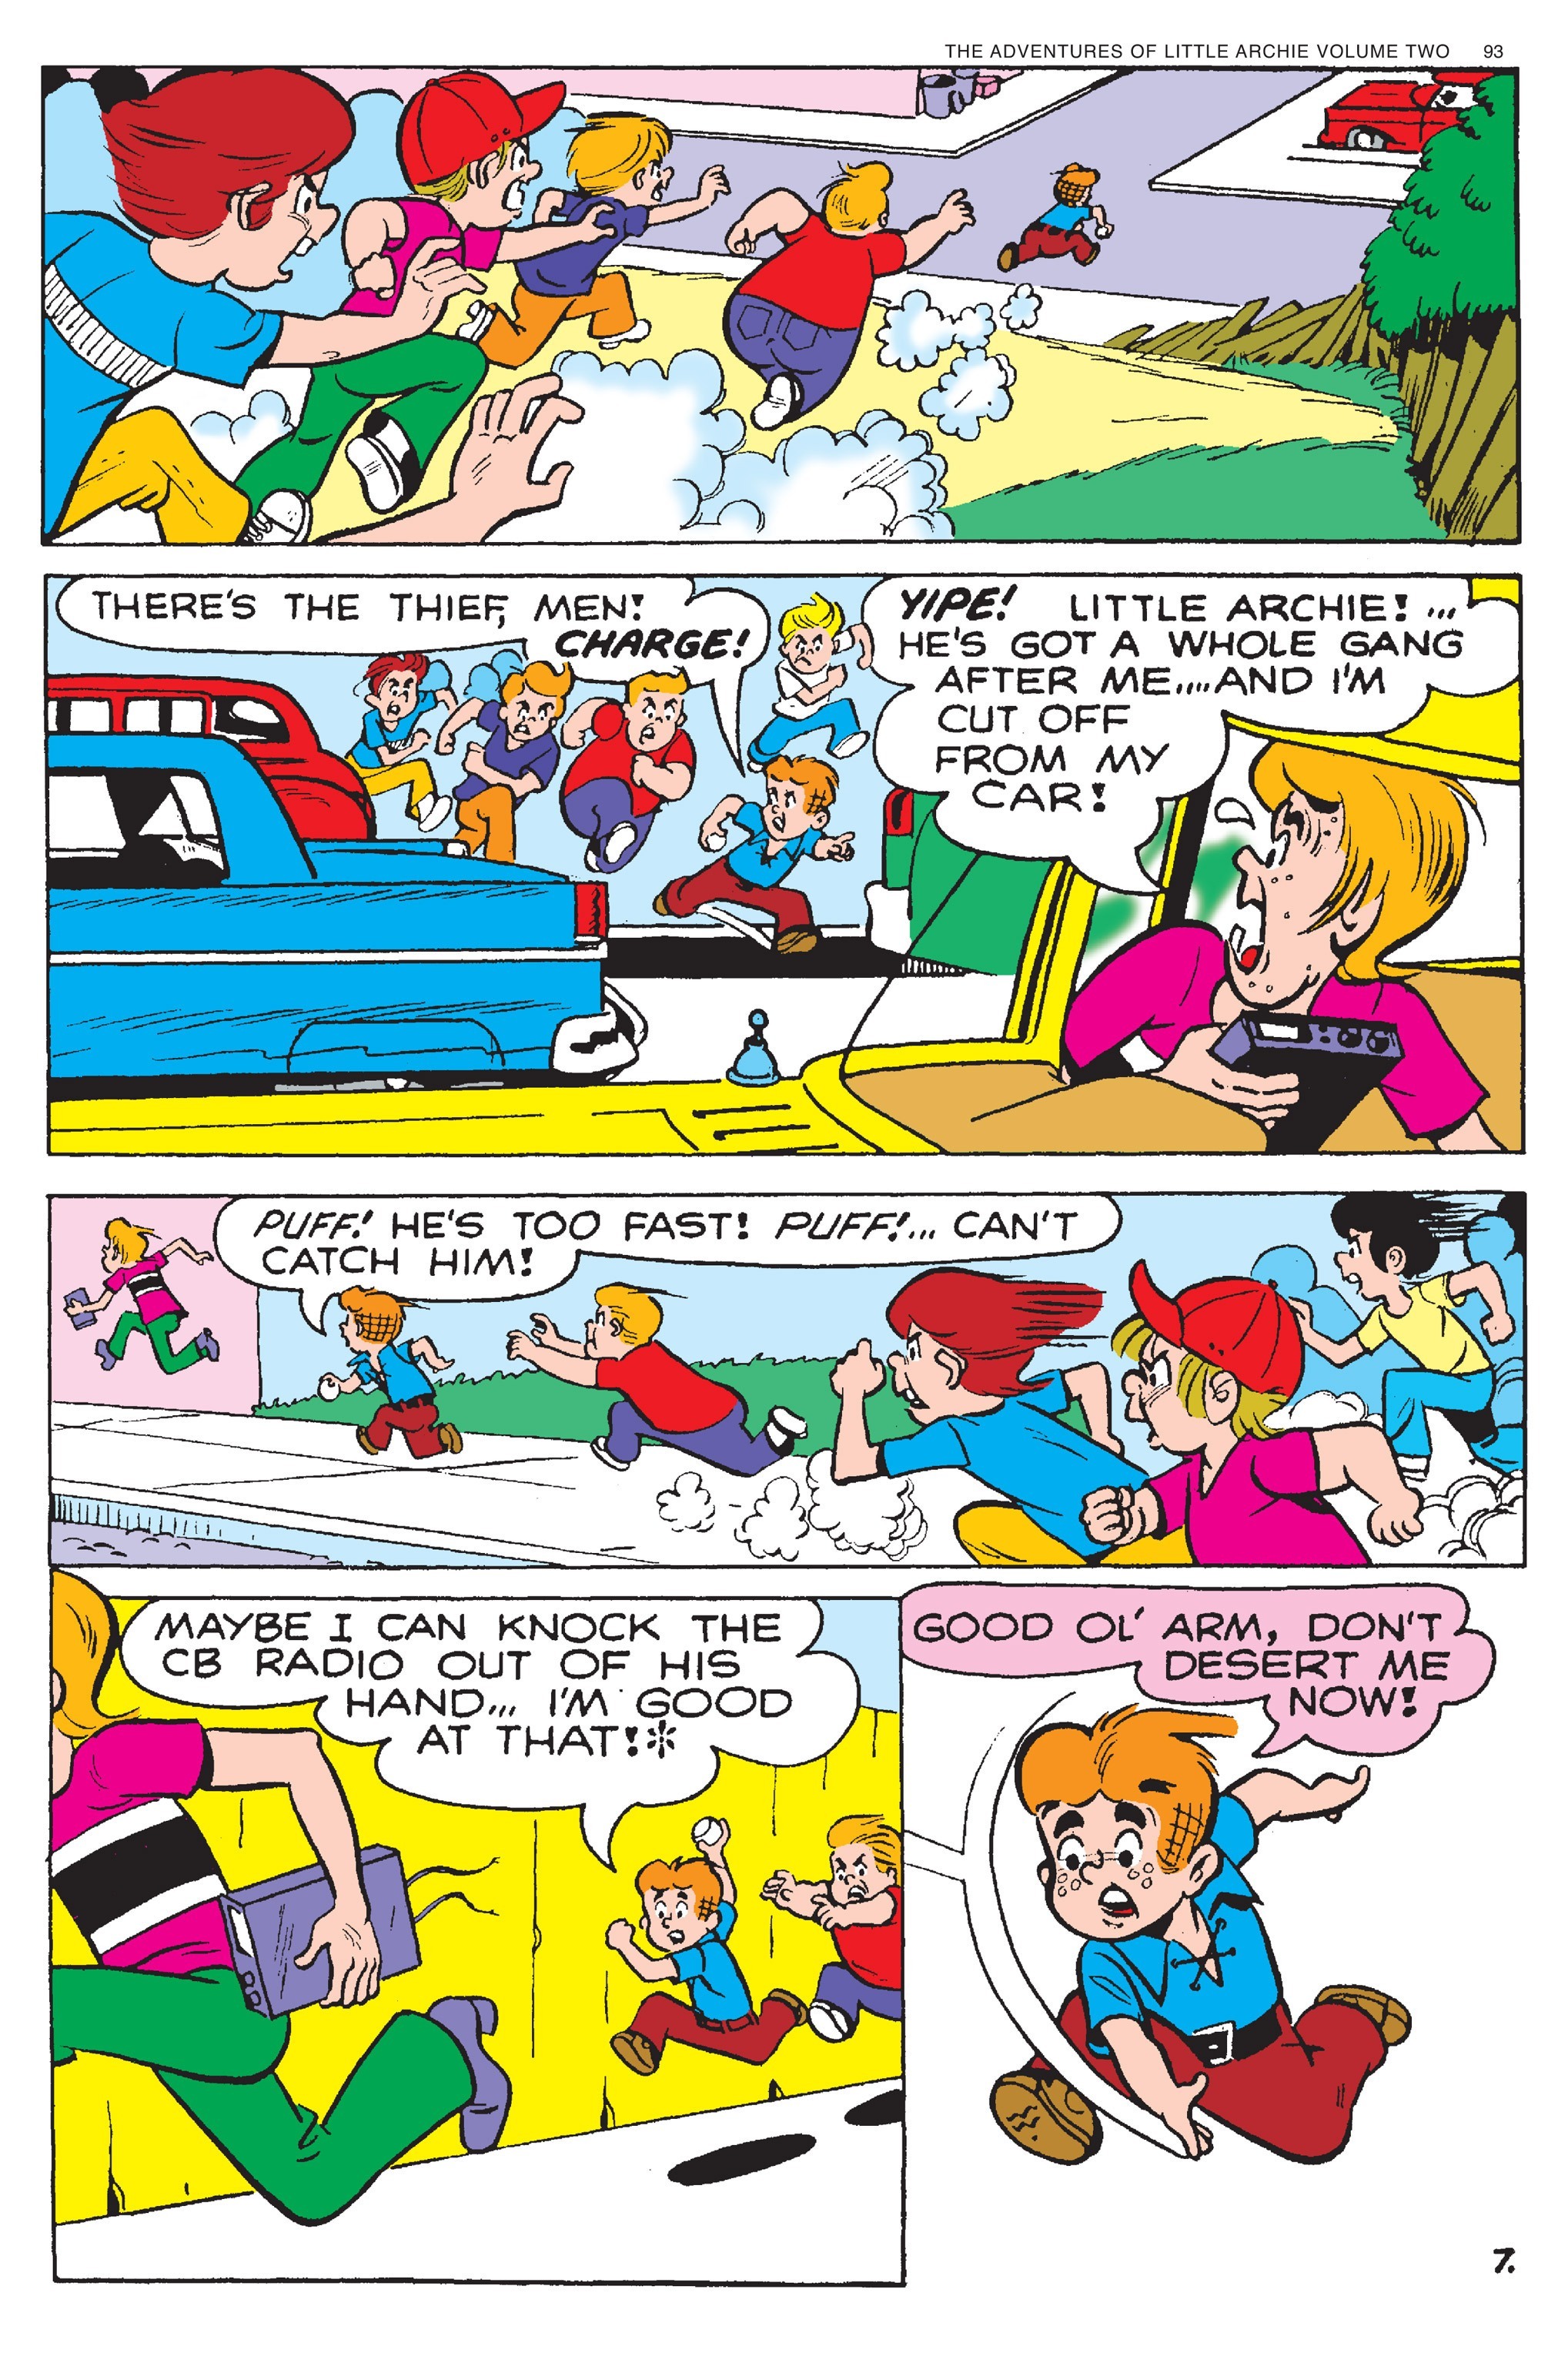 Read online Adventures of Little Archie comic -  Issue # TPB 2 - 94